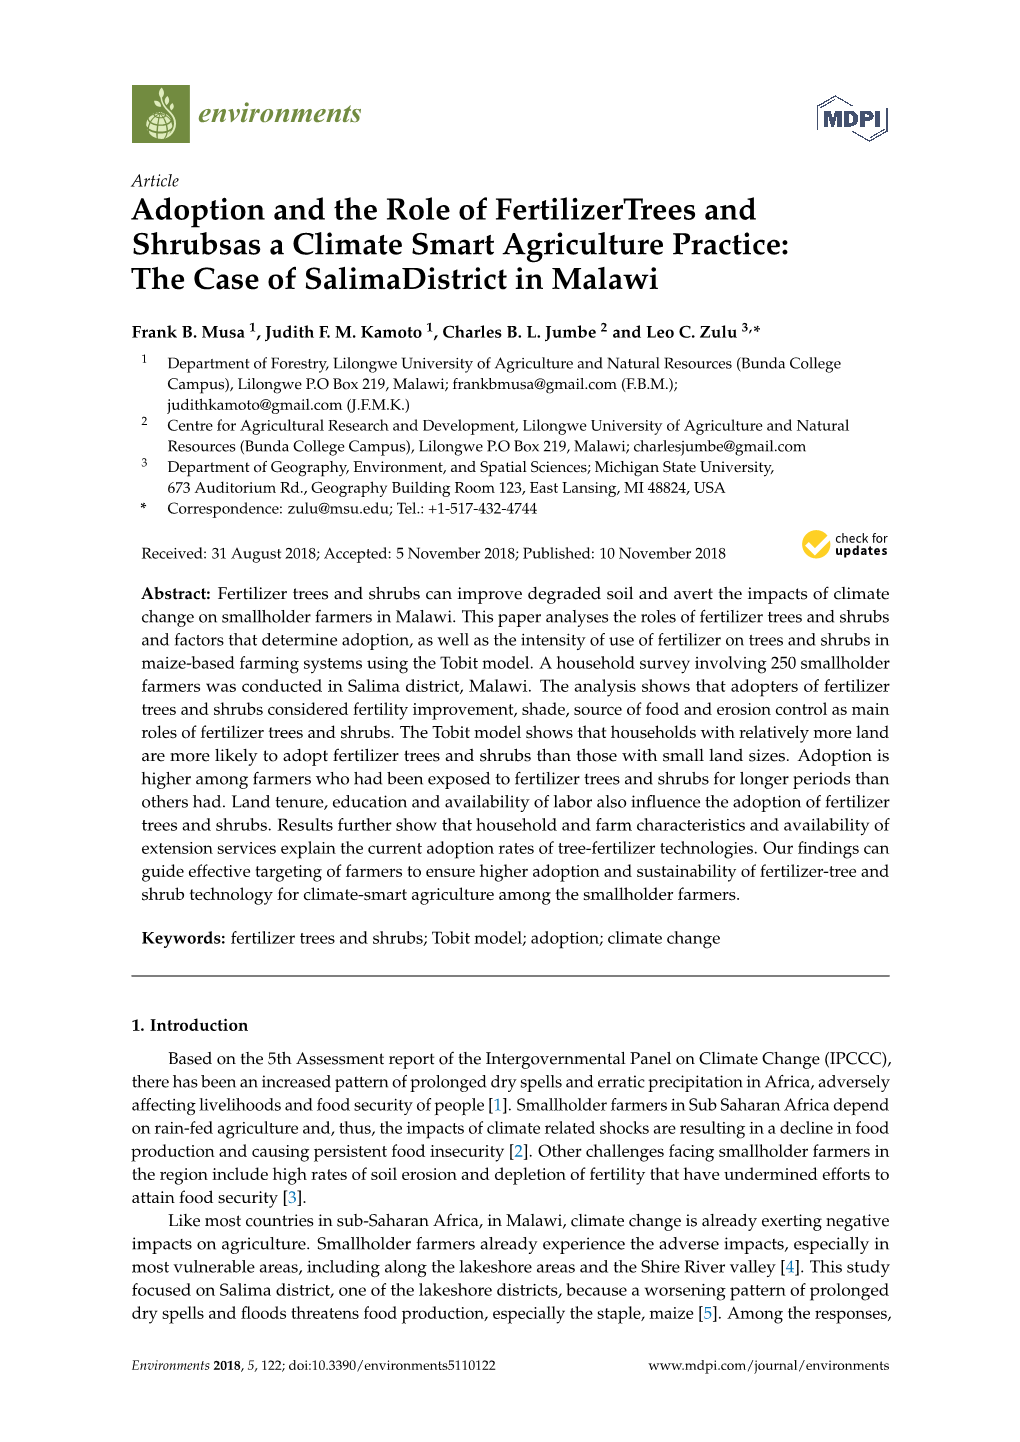 Adoption and the Role of Fertilizertrees and Shrubsas a Climate Smart Agriculture Practice: the Case of Salimadistrict in Malawi